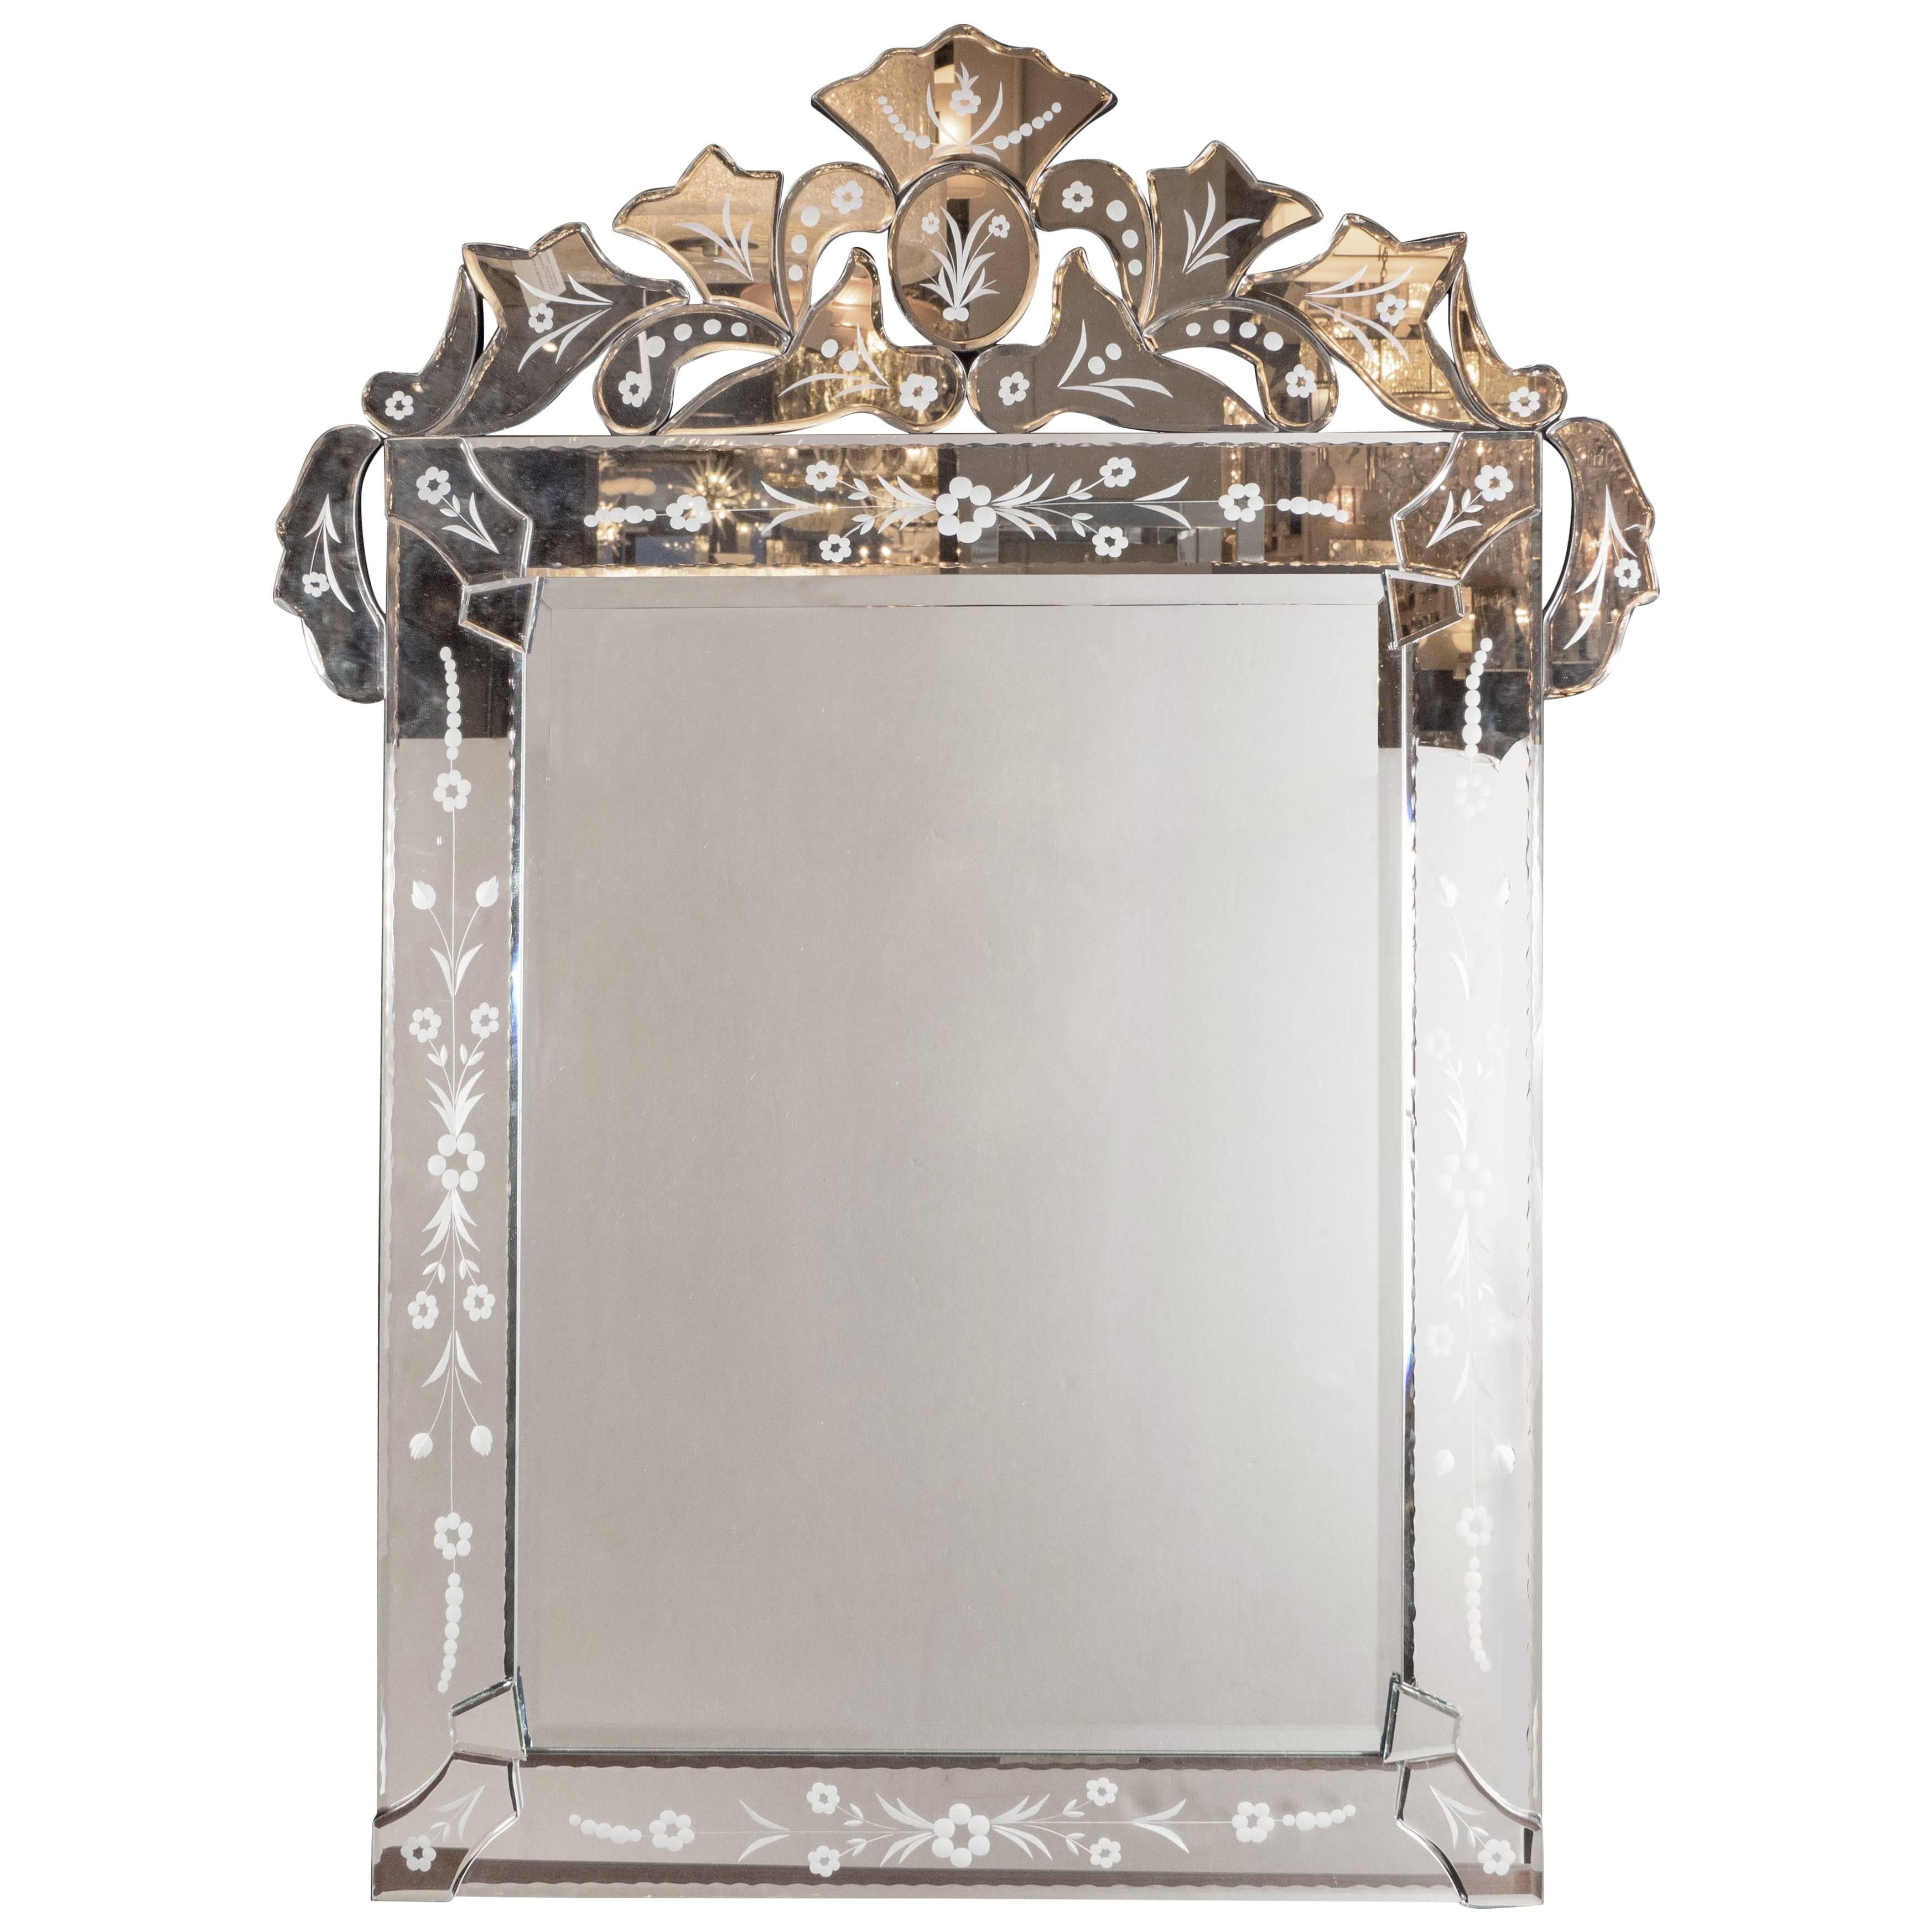 1940s Venetian Mirror with Bevel and Chain Detailing and Floral Motifs